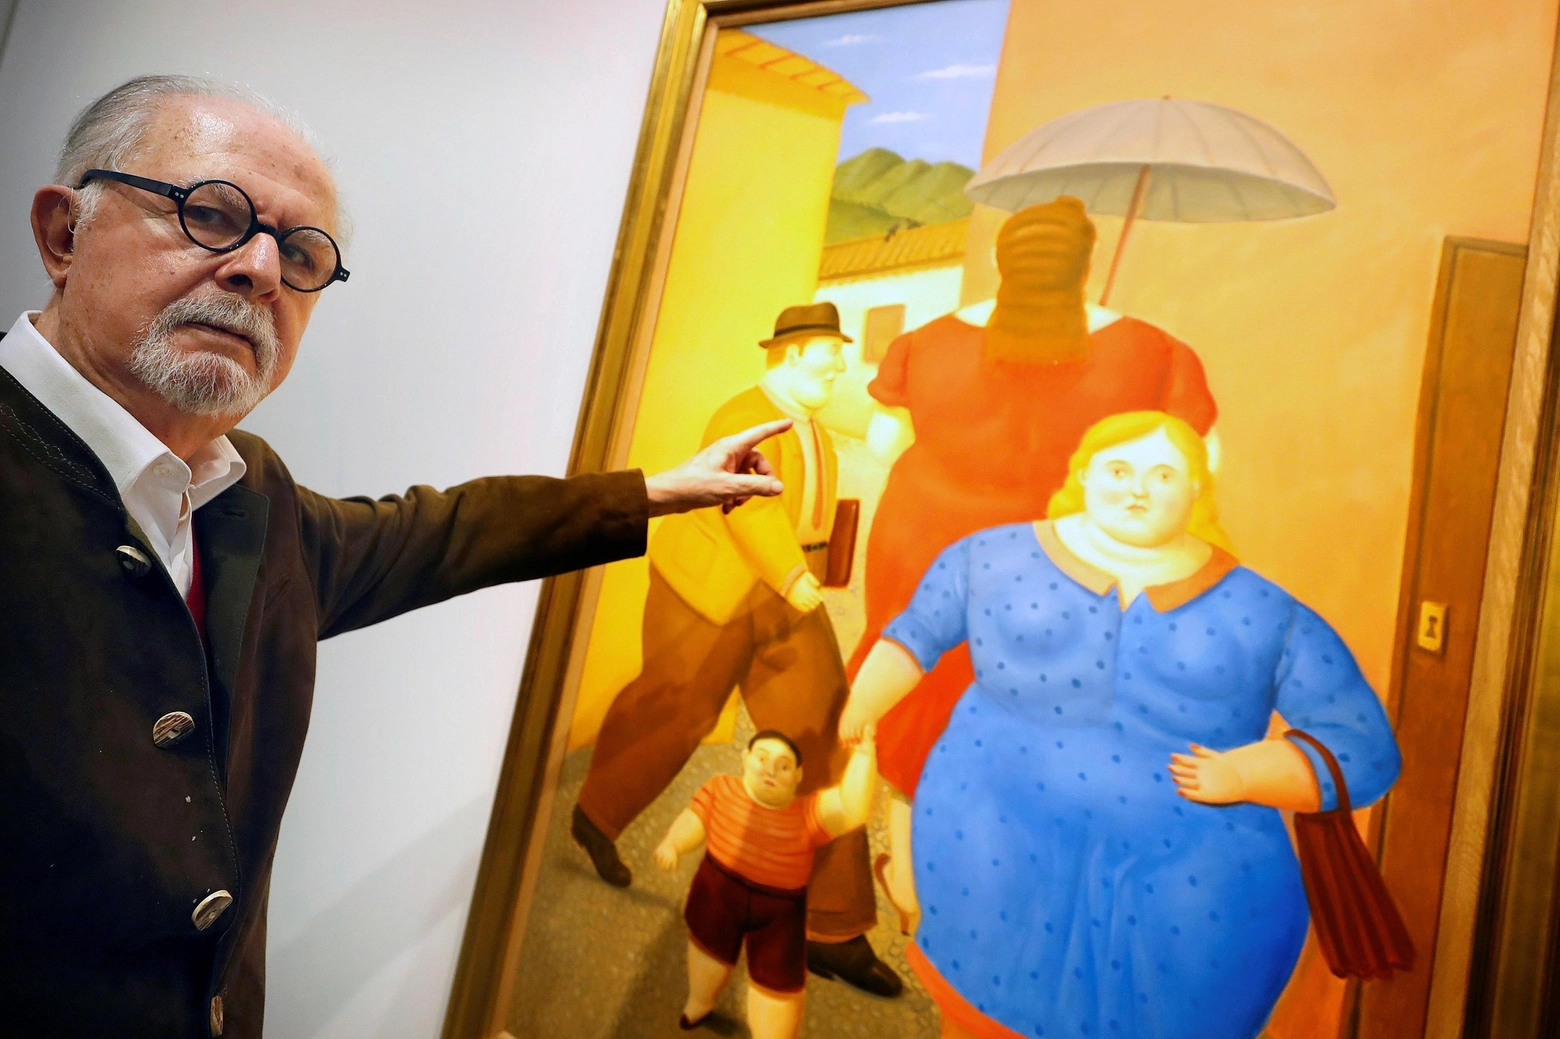 epa07387317 Colombian artist Fernando Botero poses for the photographer next to one of his works during an interview in Madrid, Spain, 21 February 2019 (issued on 22 February 2019). Botero, World's most valued Latin American artist, is to exhibit in Madrid after more than 20 years.  EPA/JAVIER LIZON